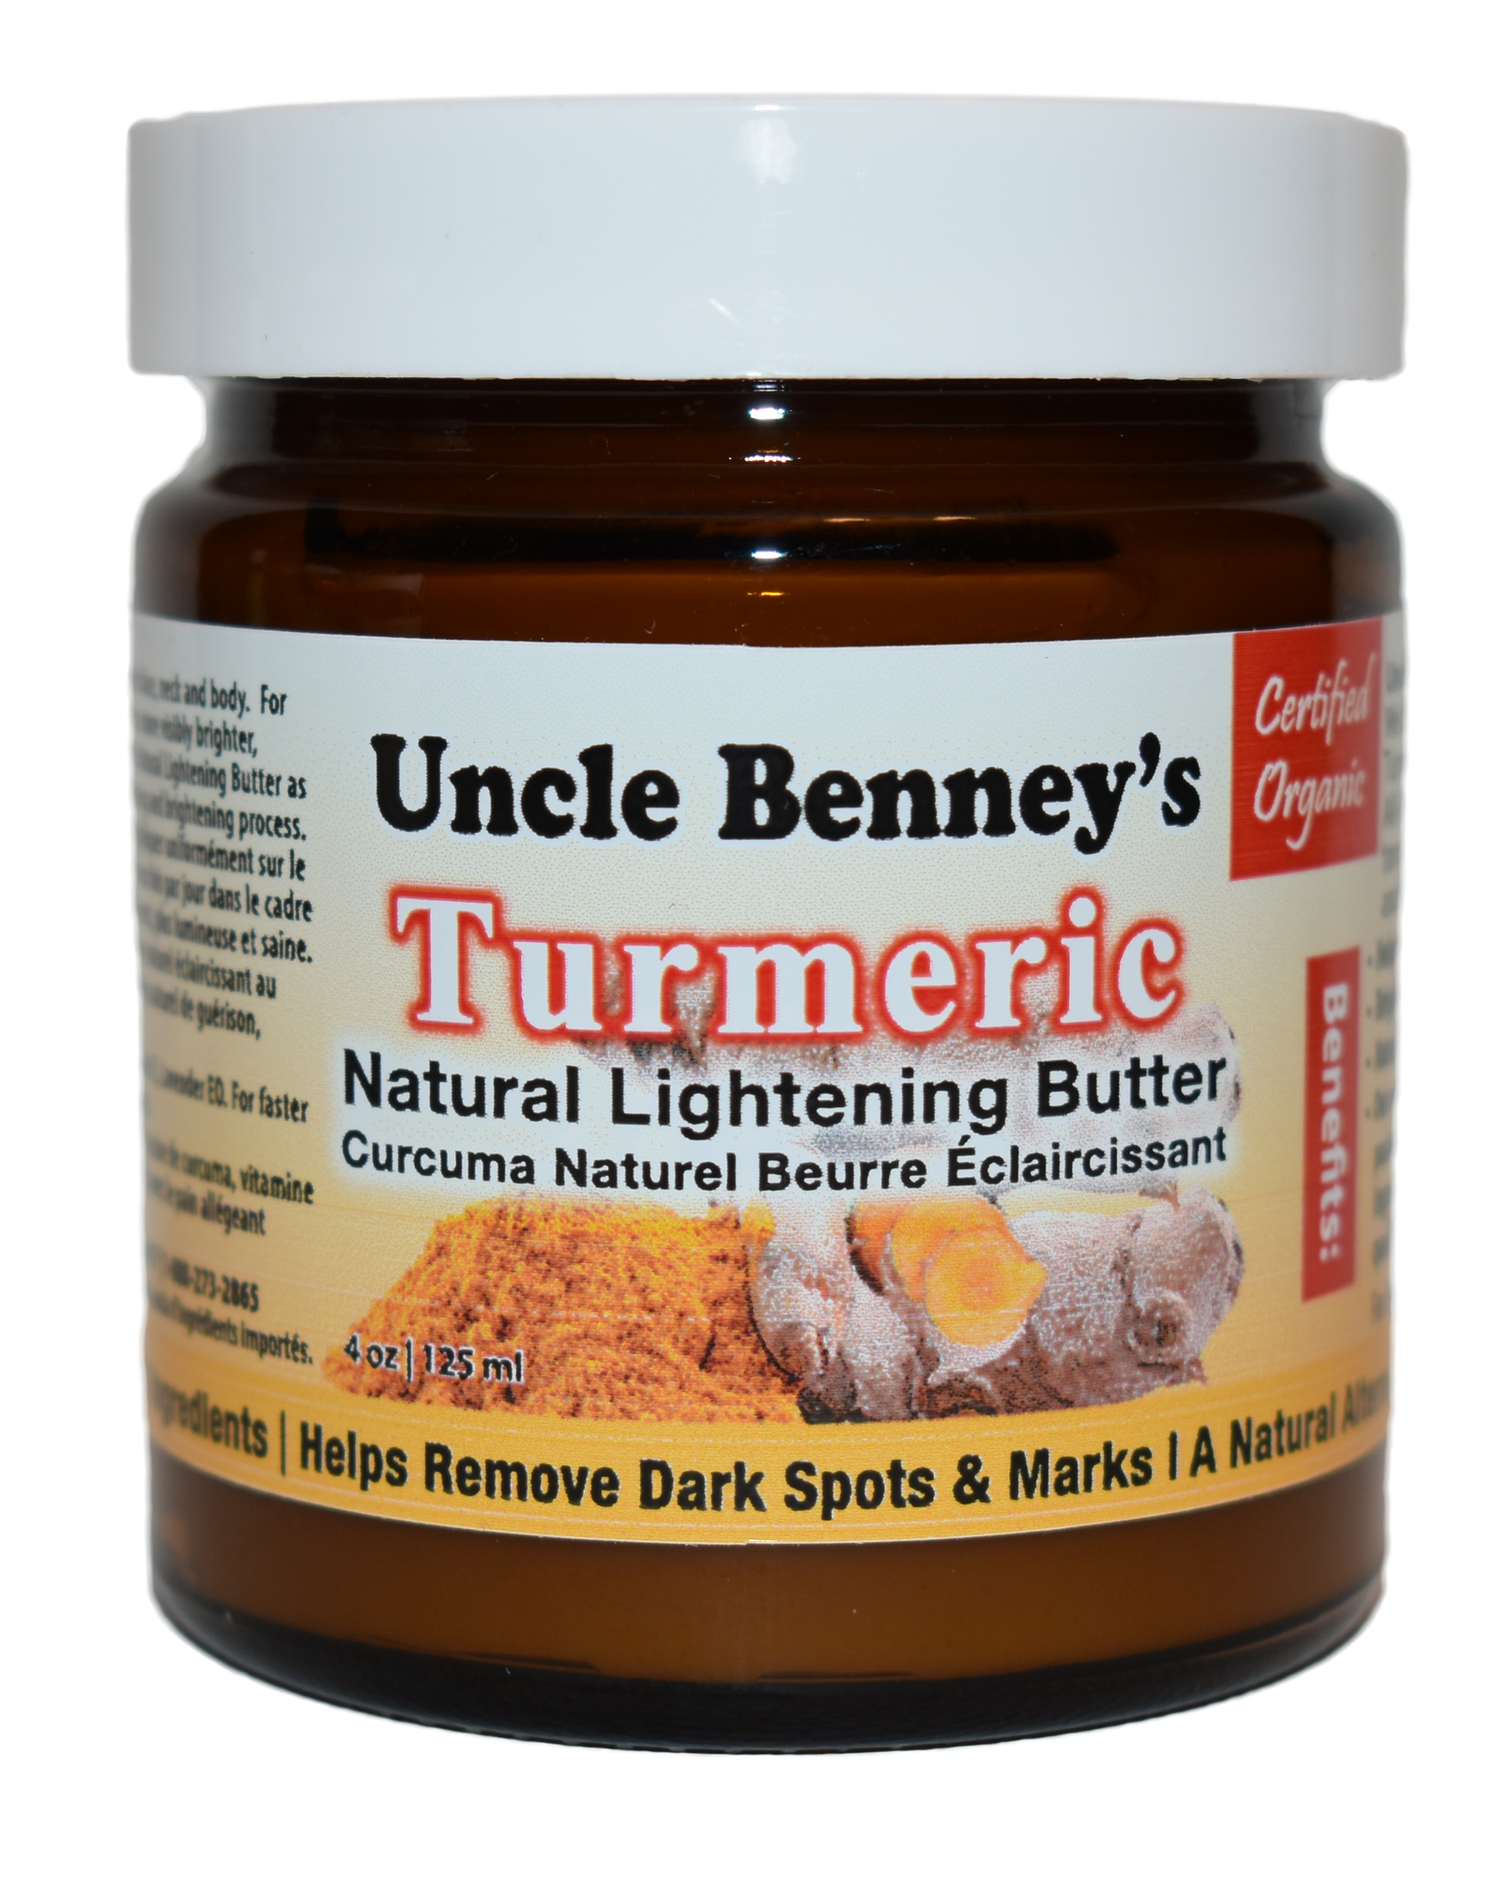 uncle benney's tumeric butter Natural beauty solutions for normal to extremely dry or damaged skin, facial hyperpigmentation, dark marks & spots, acne, eczema and skin problems